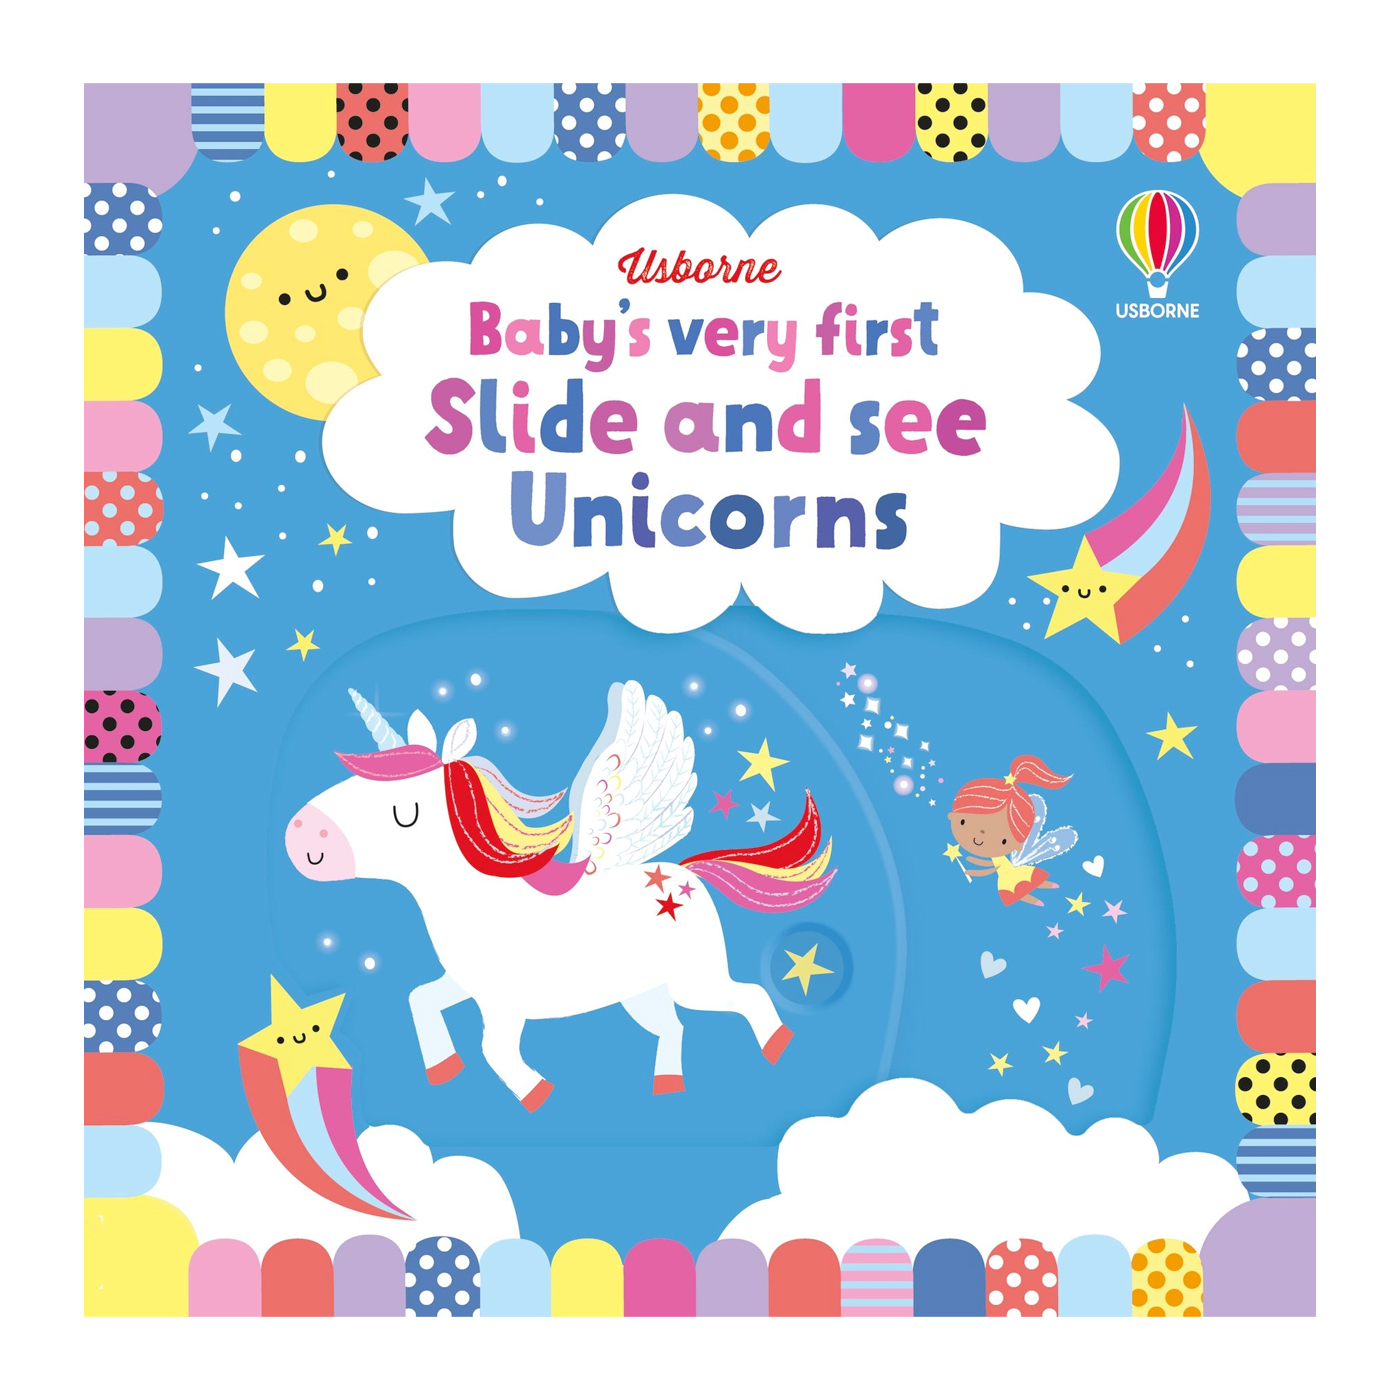 USBORNE Baby's Very First Slide And See Unicorns